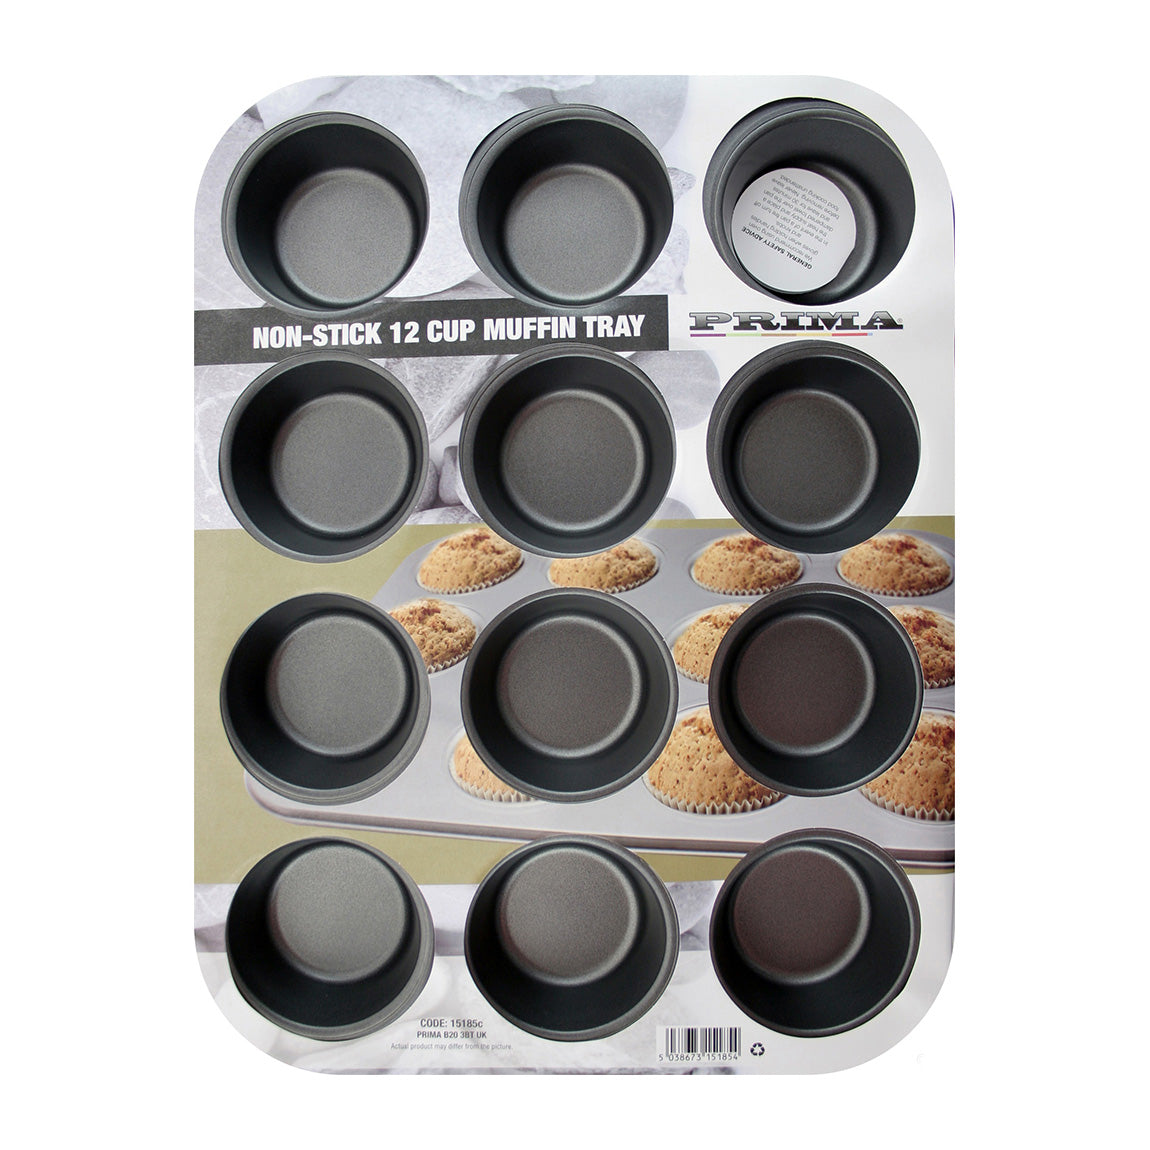 Baking Sheet for Muffins, 12 Cup Capacity